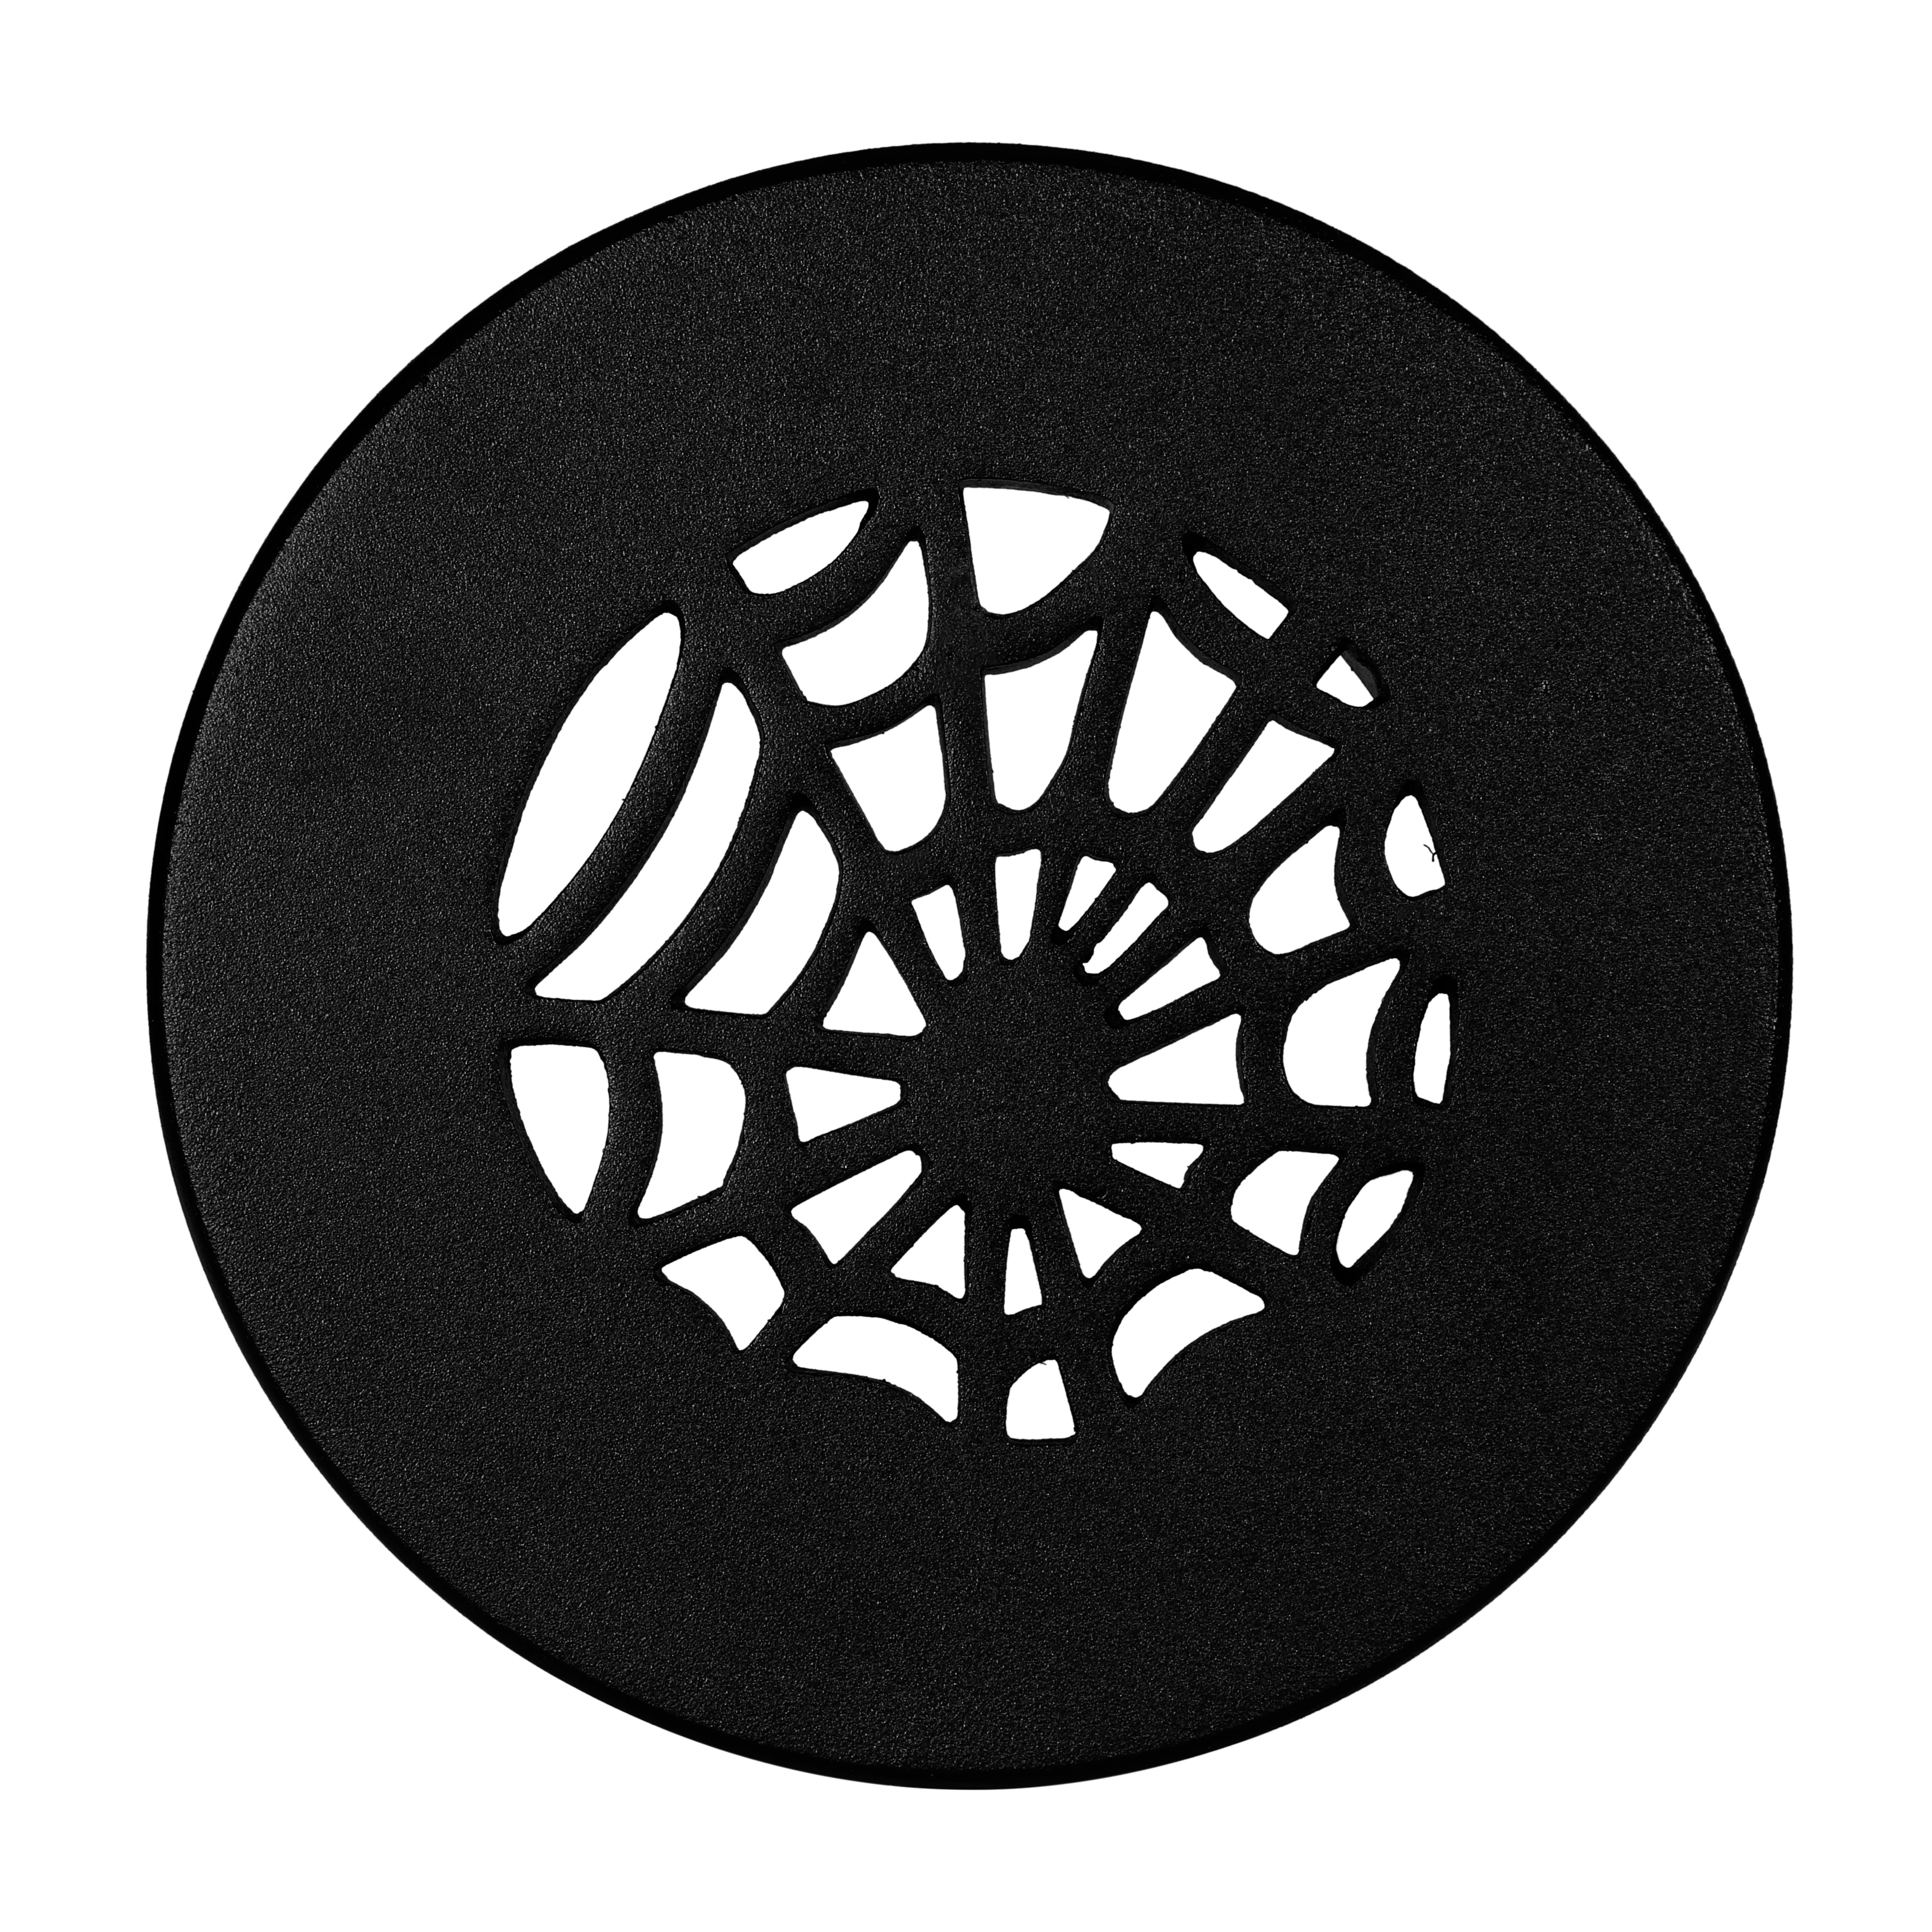 Spooky Gothic Round Vent cover 5" Duct Opening (Overall 6-1/2") in Spider Web Design | Solid Cast Aluminium Register Cover | Powder Coated